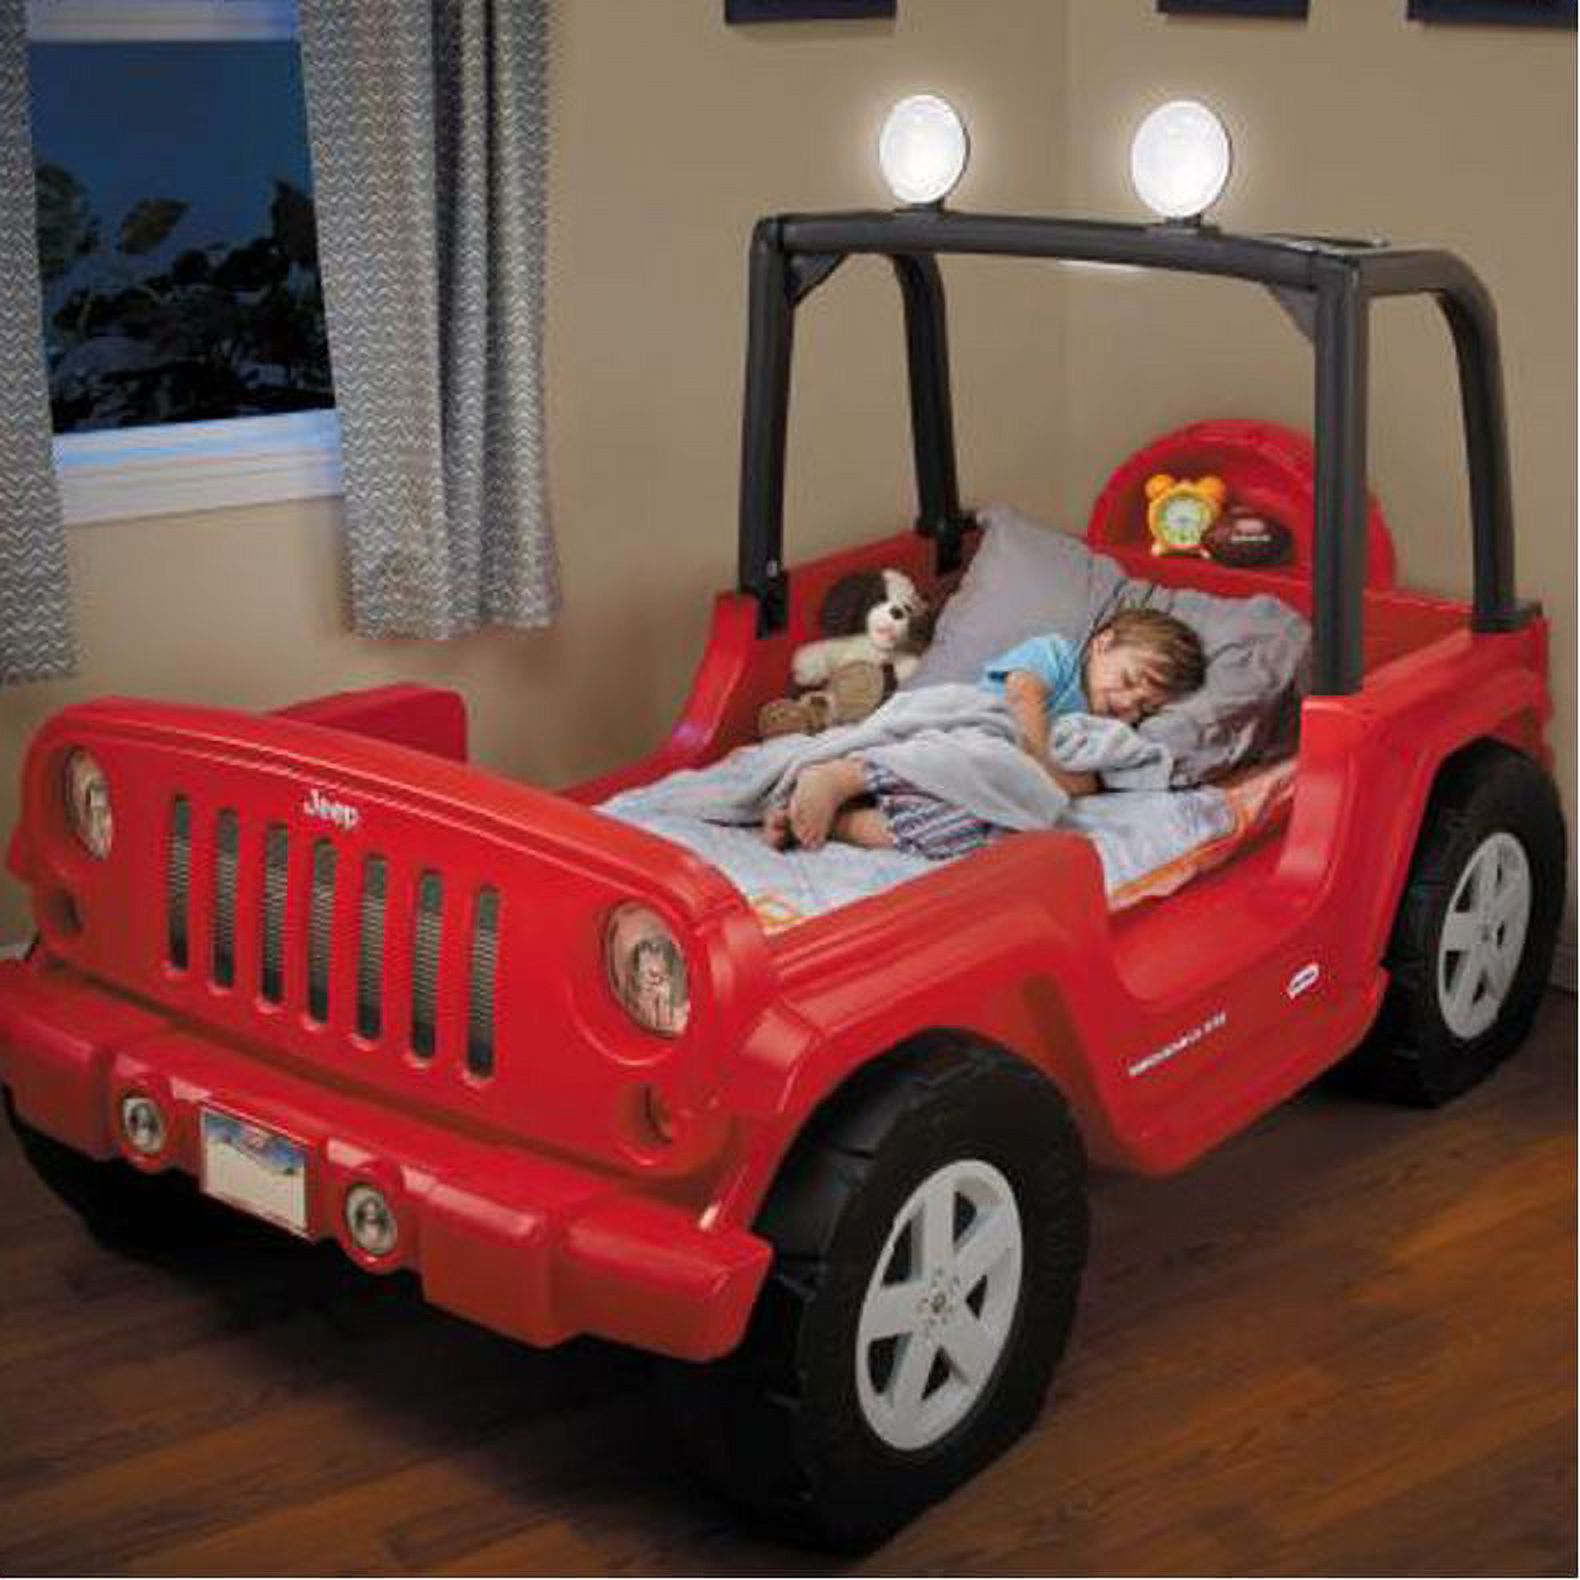 Little Tikes Jeep Wrangler Toddler-to-Twin Convertible Bed, Red - image 5 of 8